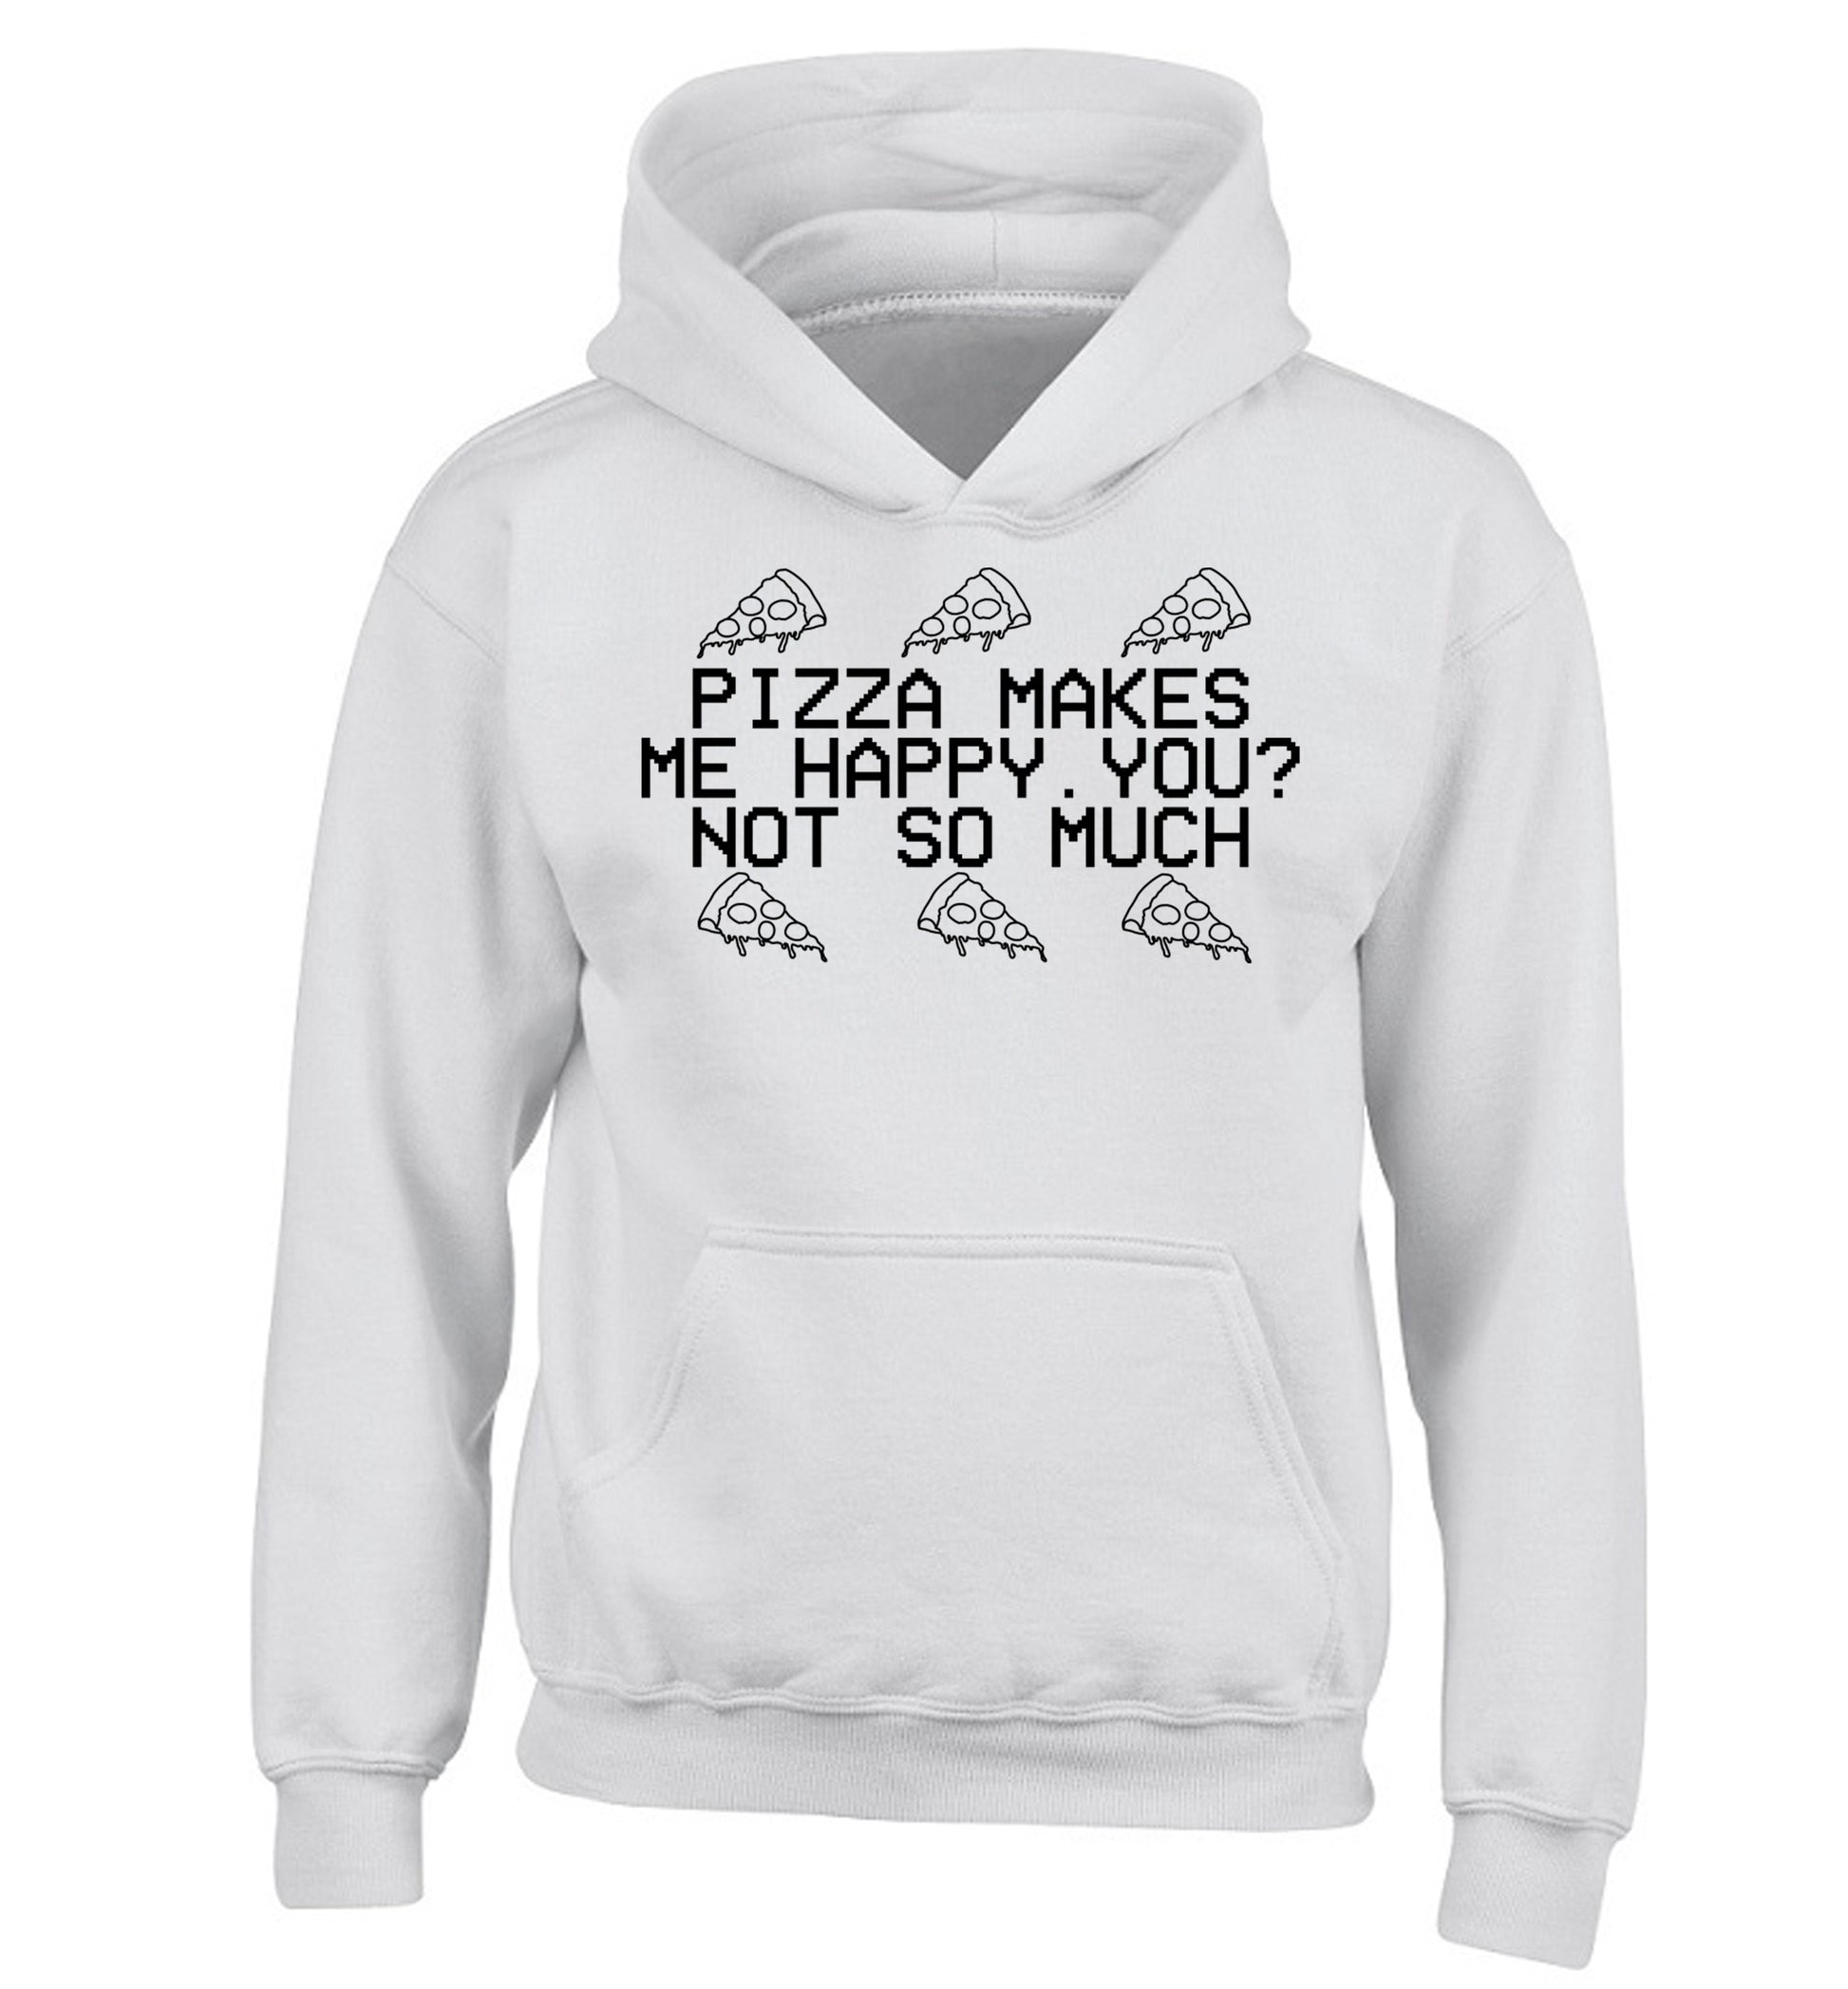 Pizza makes me happy, You? Not so much children's white hoodie 12-14 Years